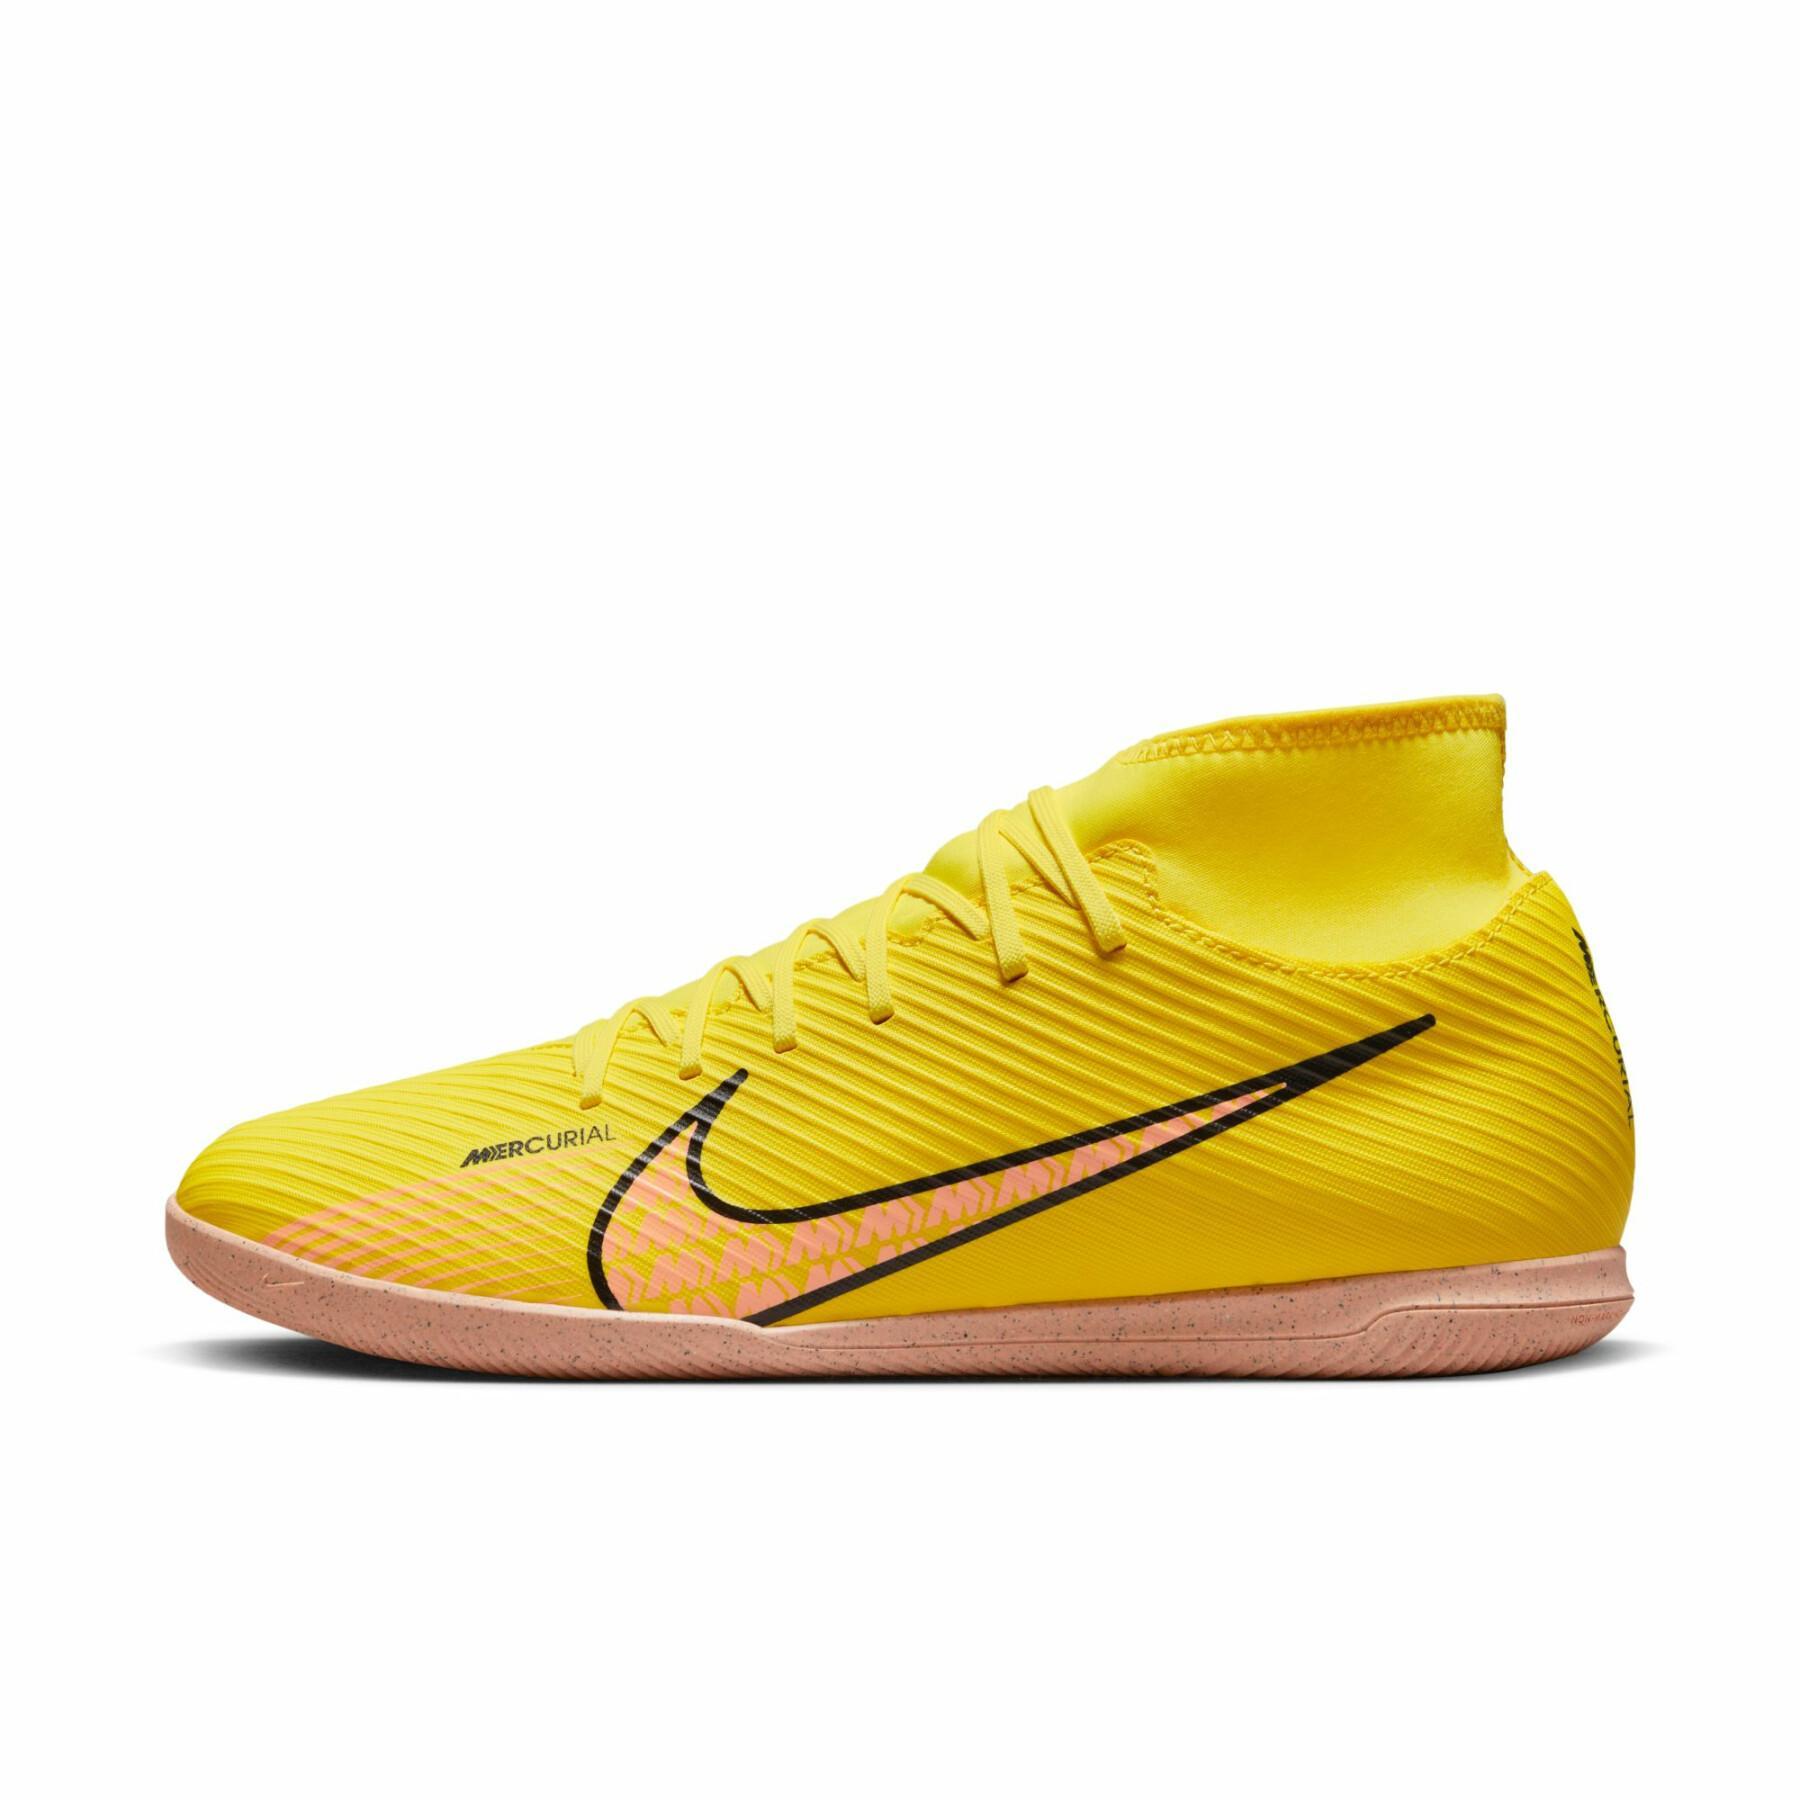 Zapatillas de fútbol Nike Mercurial Superfly 9 Club IC - Lucent Pack